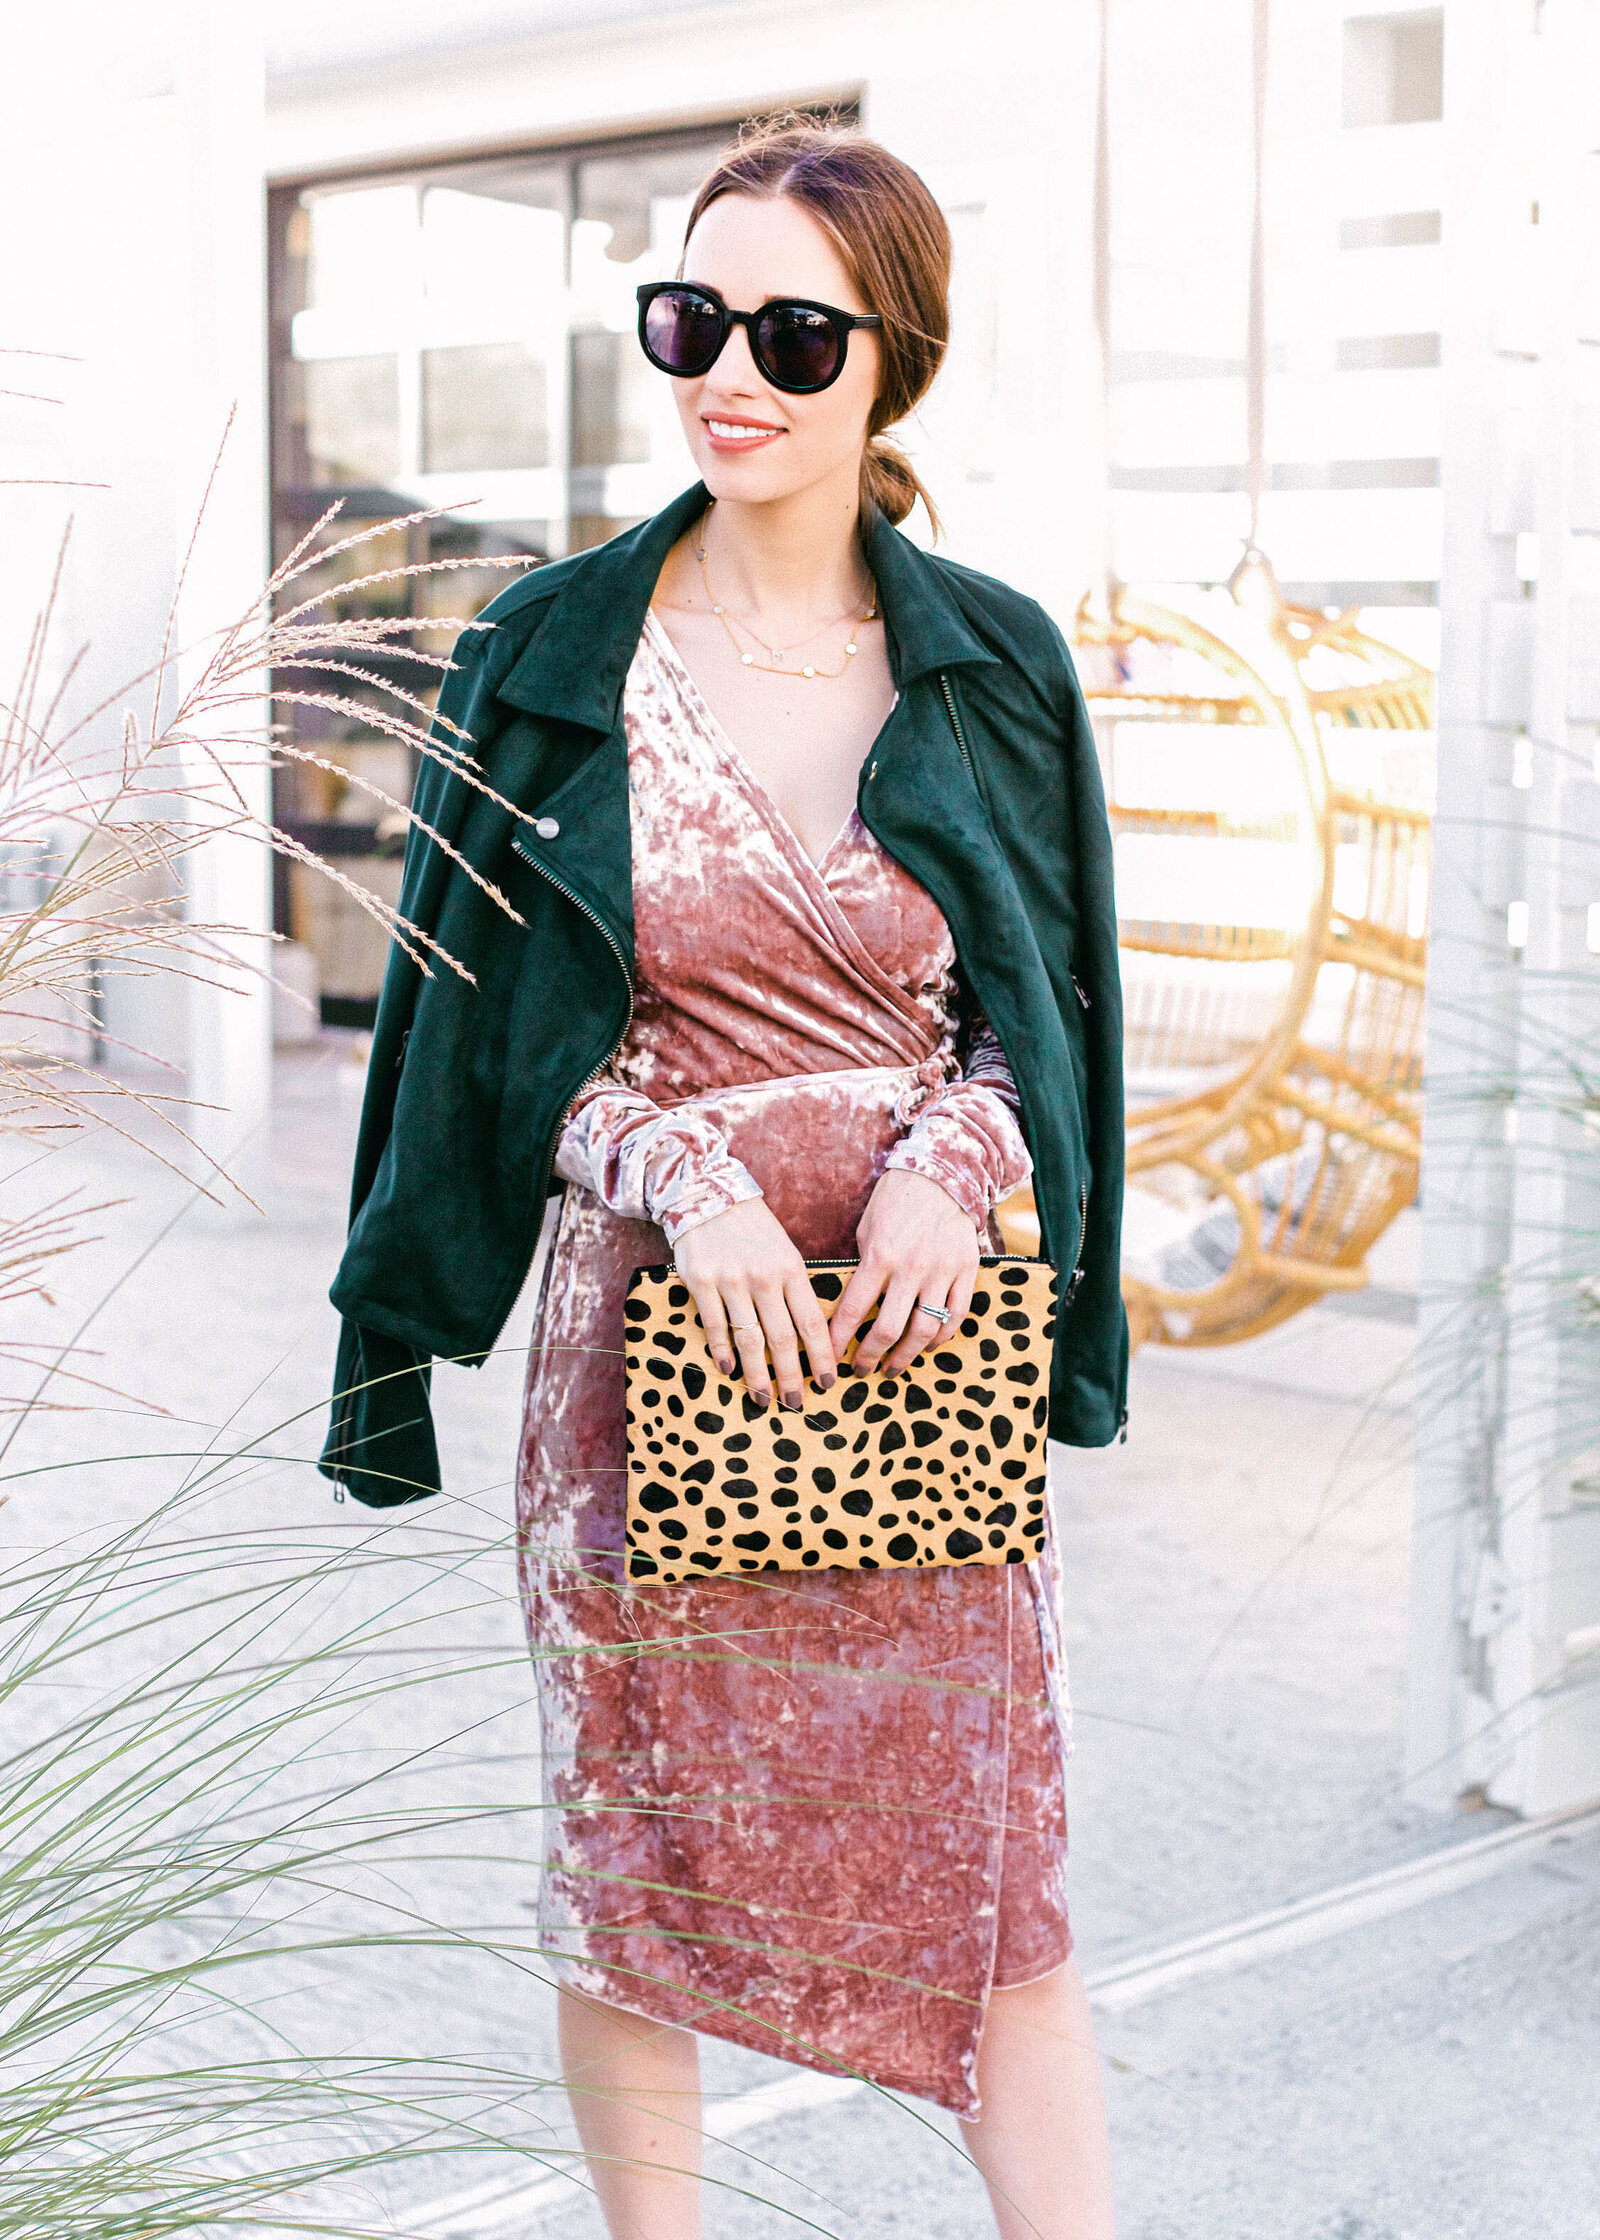 Fashion Blogger M Loves M in Newport Beach at Lido Village by commercial fashion photographer Chelsea Loren. Pink velvet dress for chic classic fall outfit.